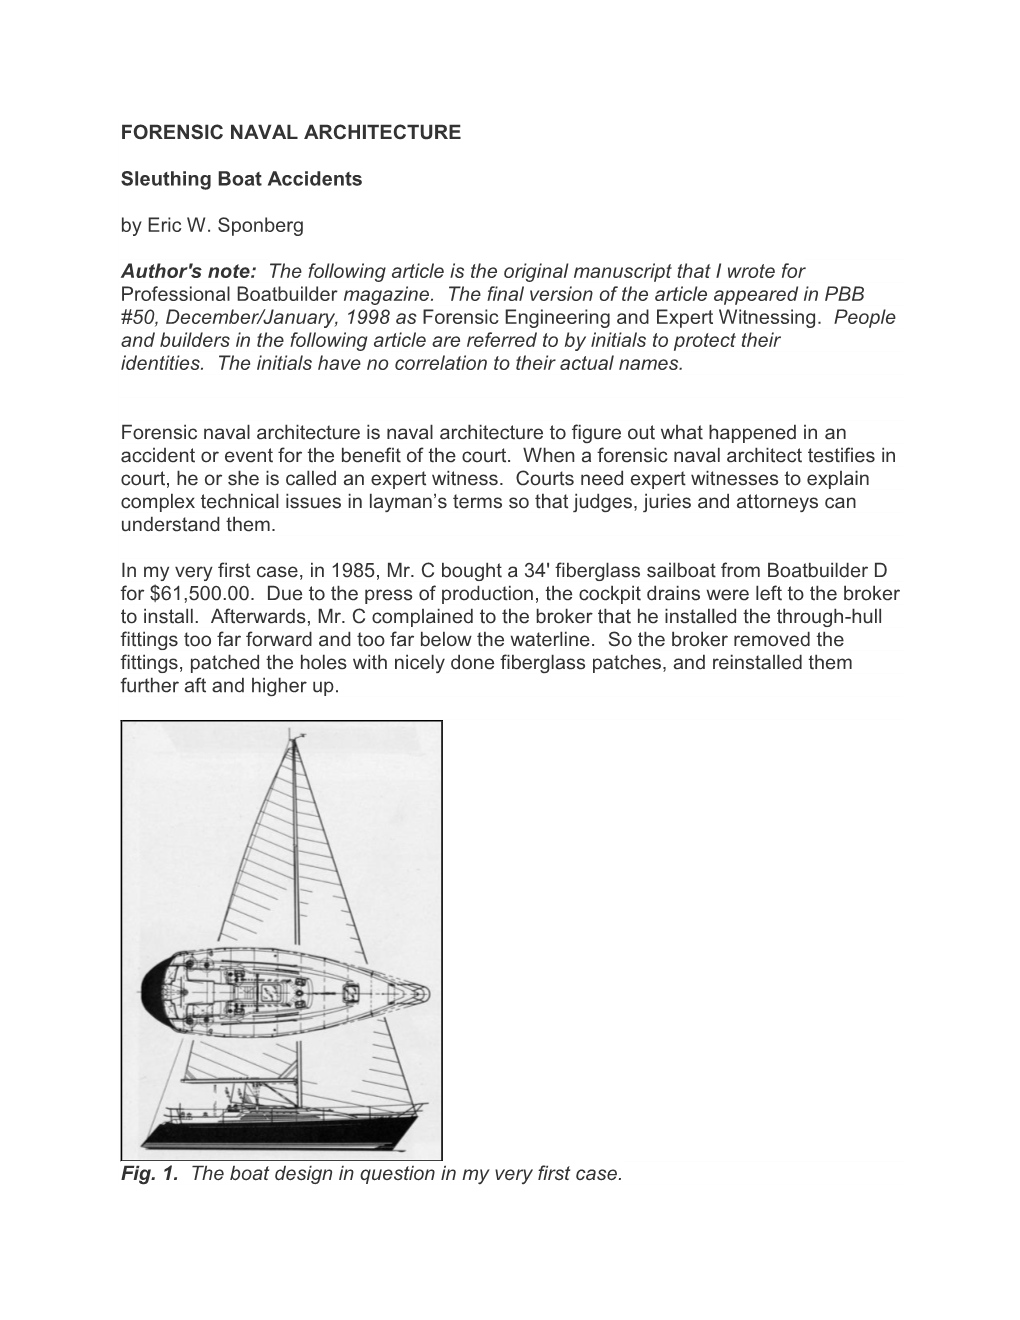 Forensic Naval Architecture – Sleuthing Boat